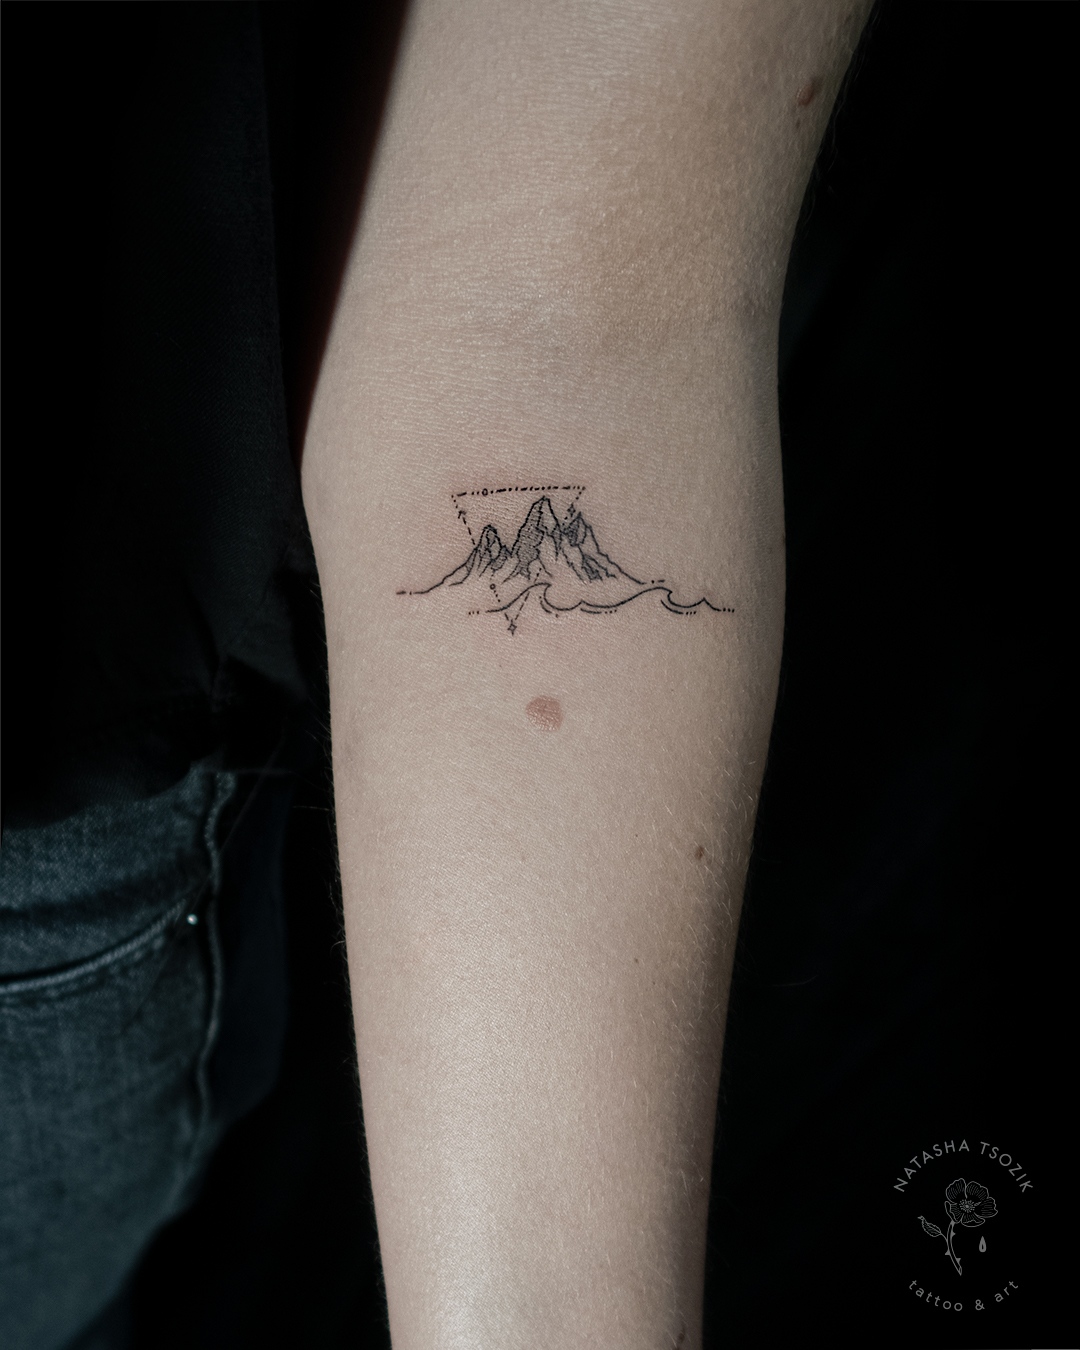 A small mountain and wave tattoo on a forearm